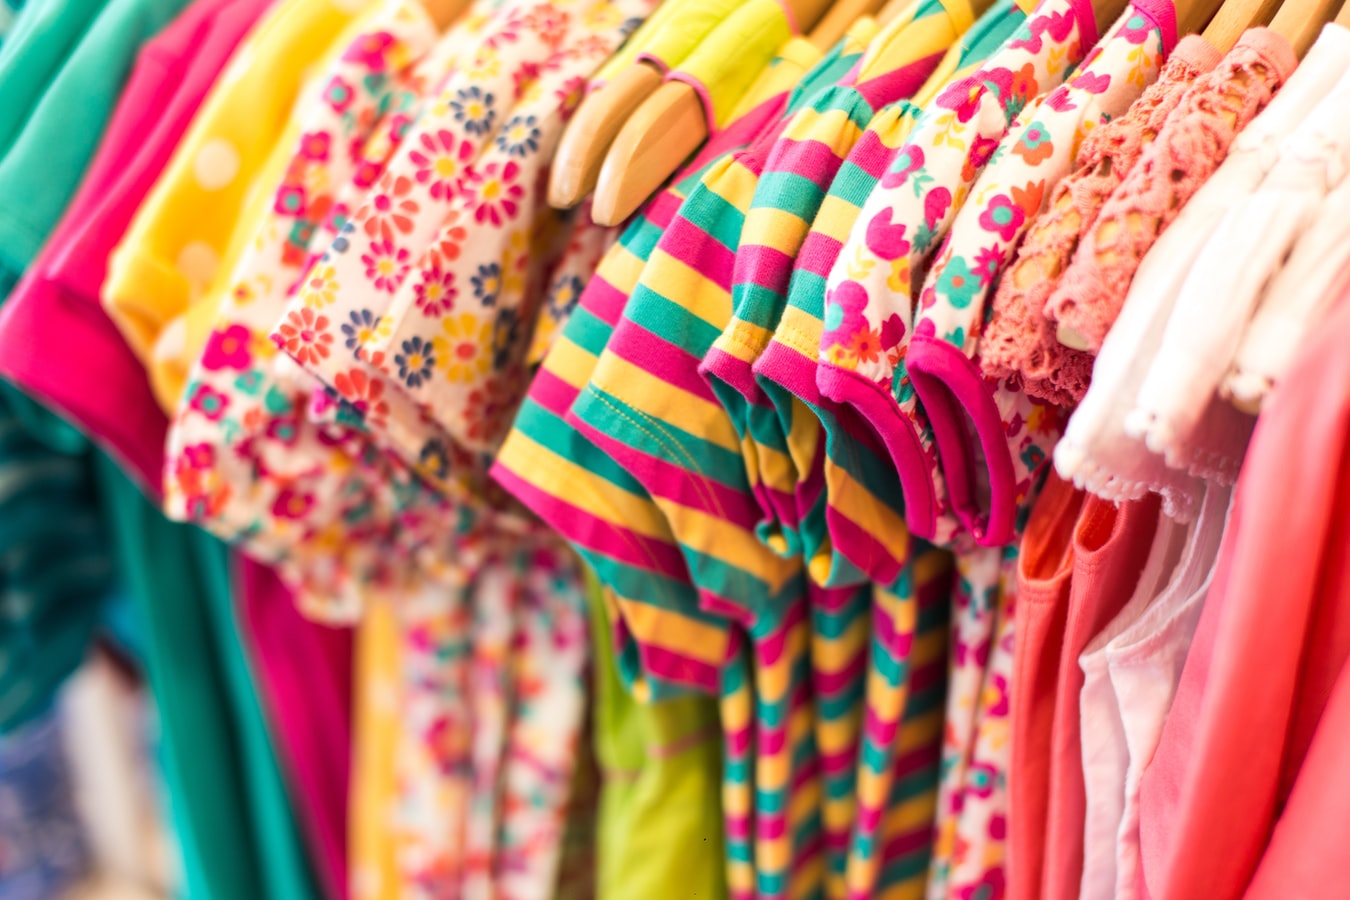 What to avoid when buying clothes for kids